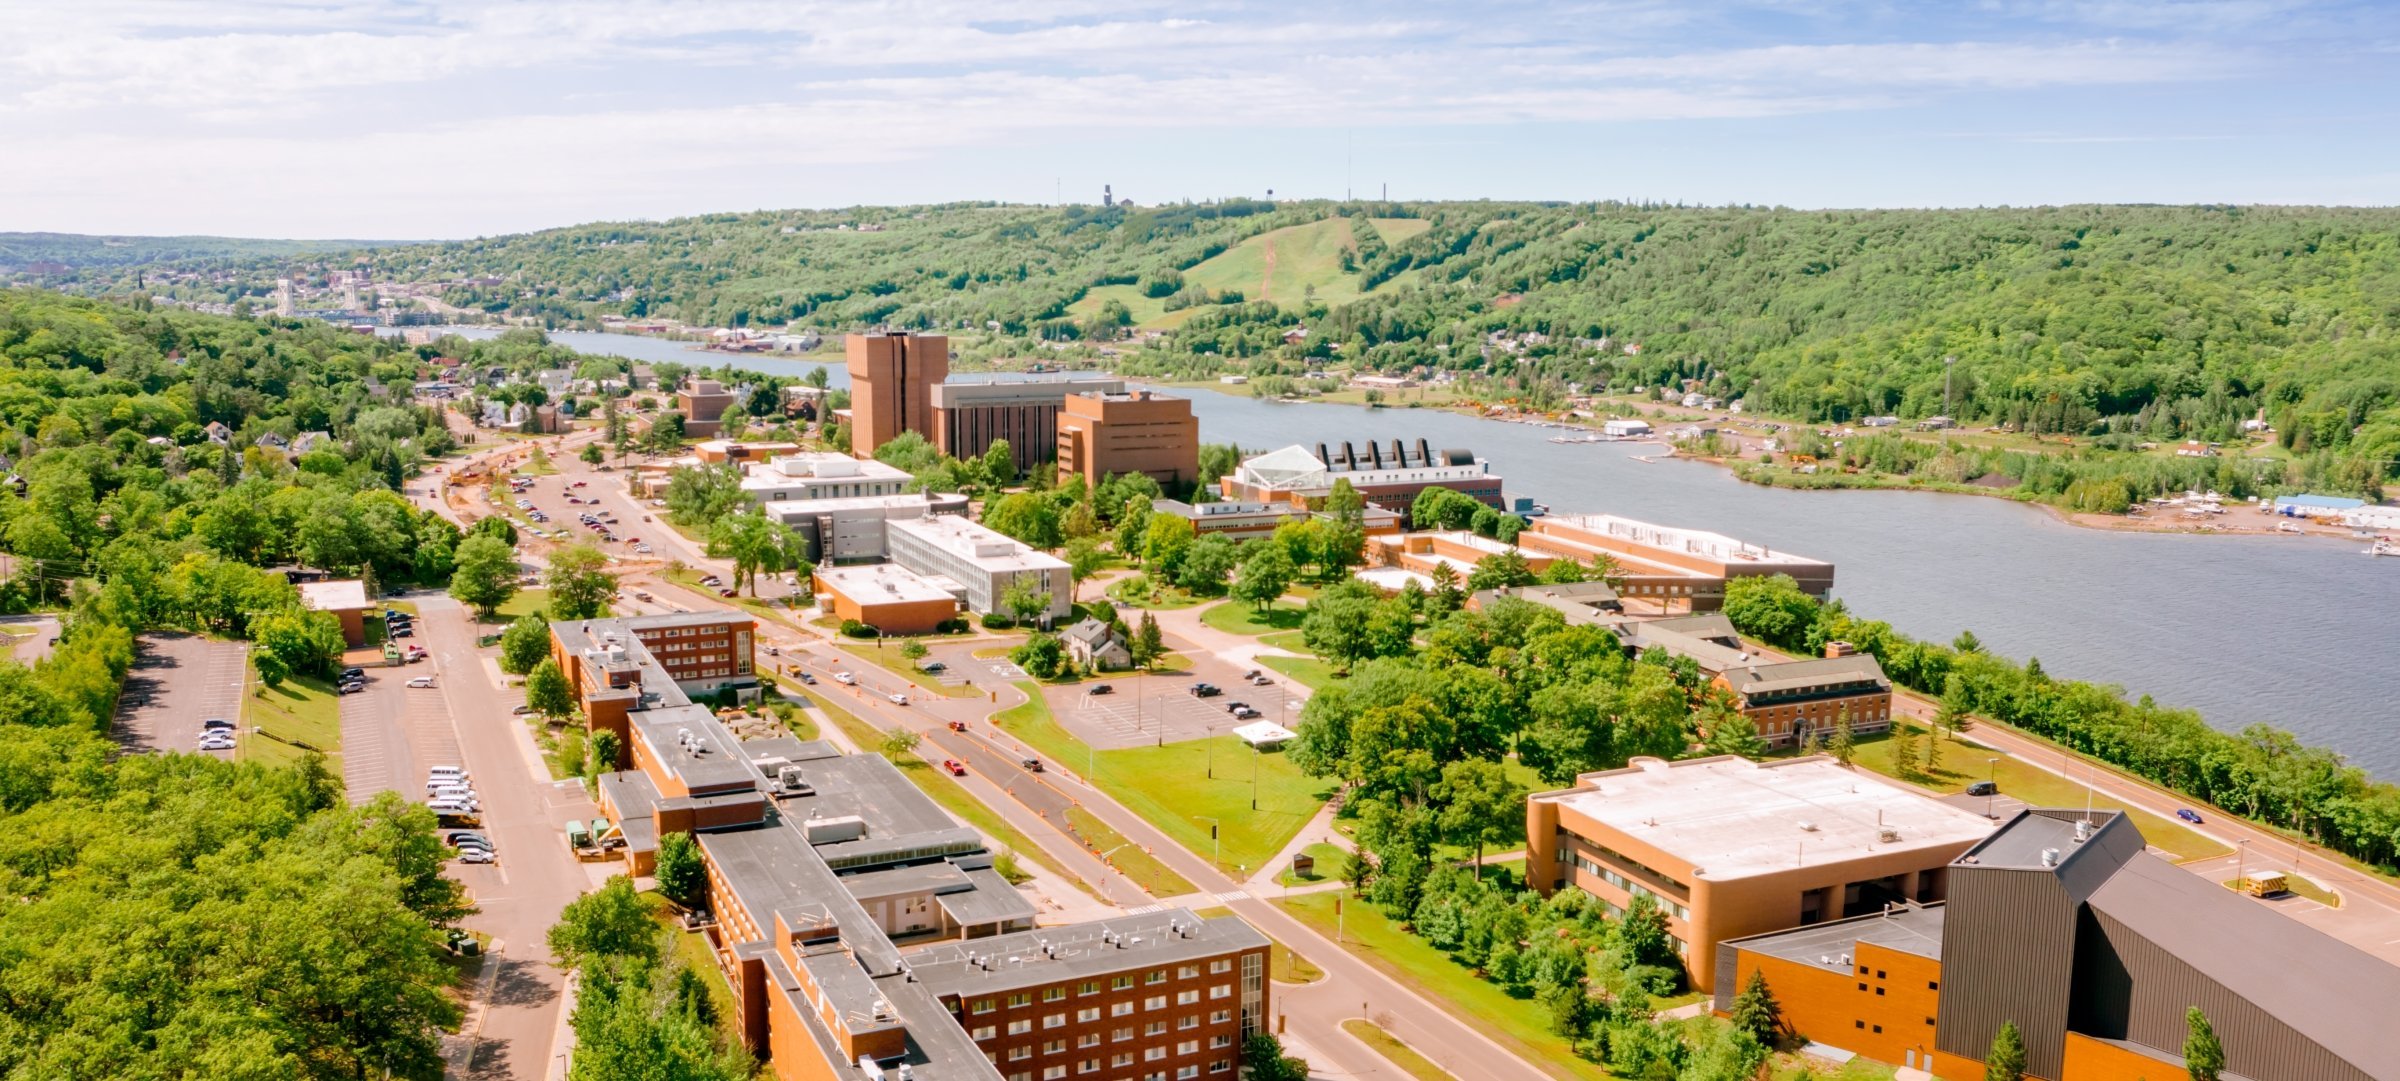 Michigan Tech's campus and Portage Waterway with Mont Ripley in the background.